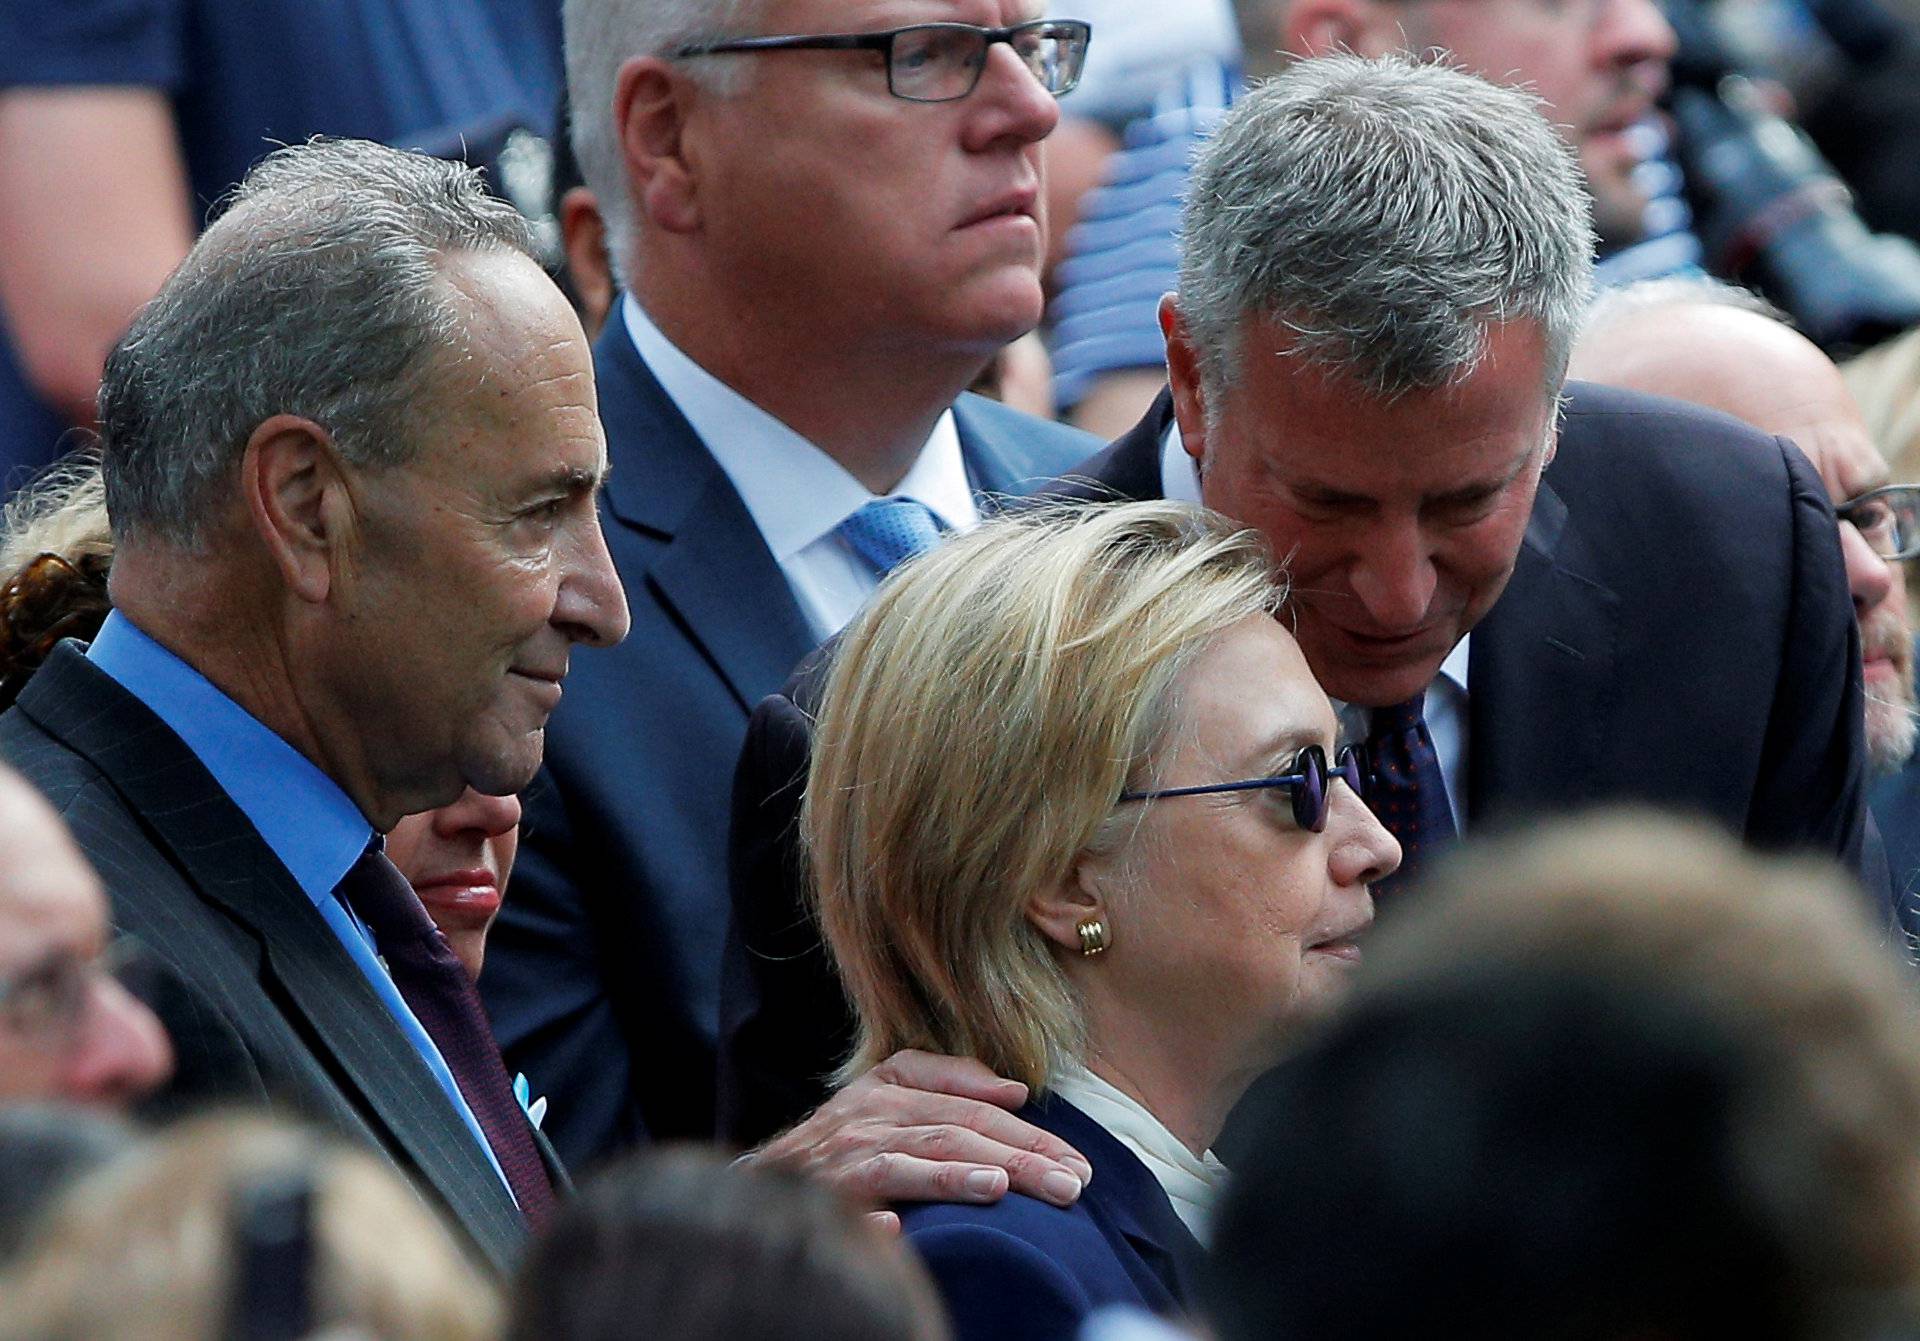 U.S. Democratic presidential candidate Hillary Clinton, New York Mayor Bill de Blasio and U.S. Senator Chuck Schumer attend ceremonies to mark the 15th anniversary of the September 11 attacks at the National 9/11 Memorial in New York